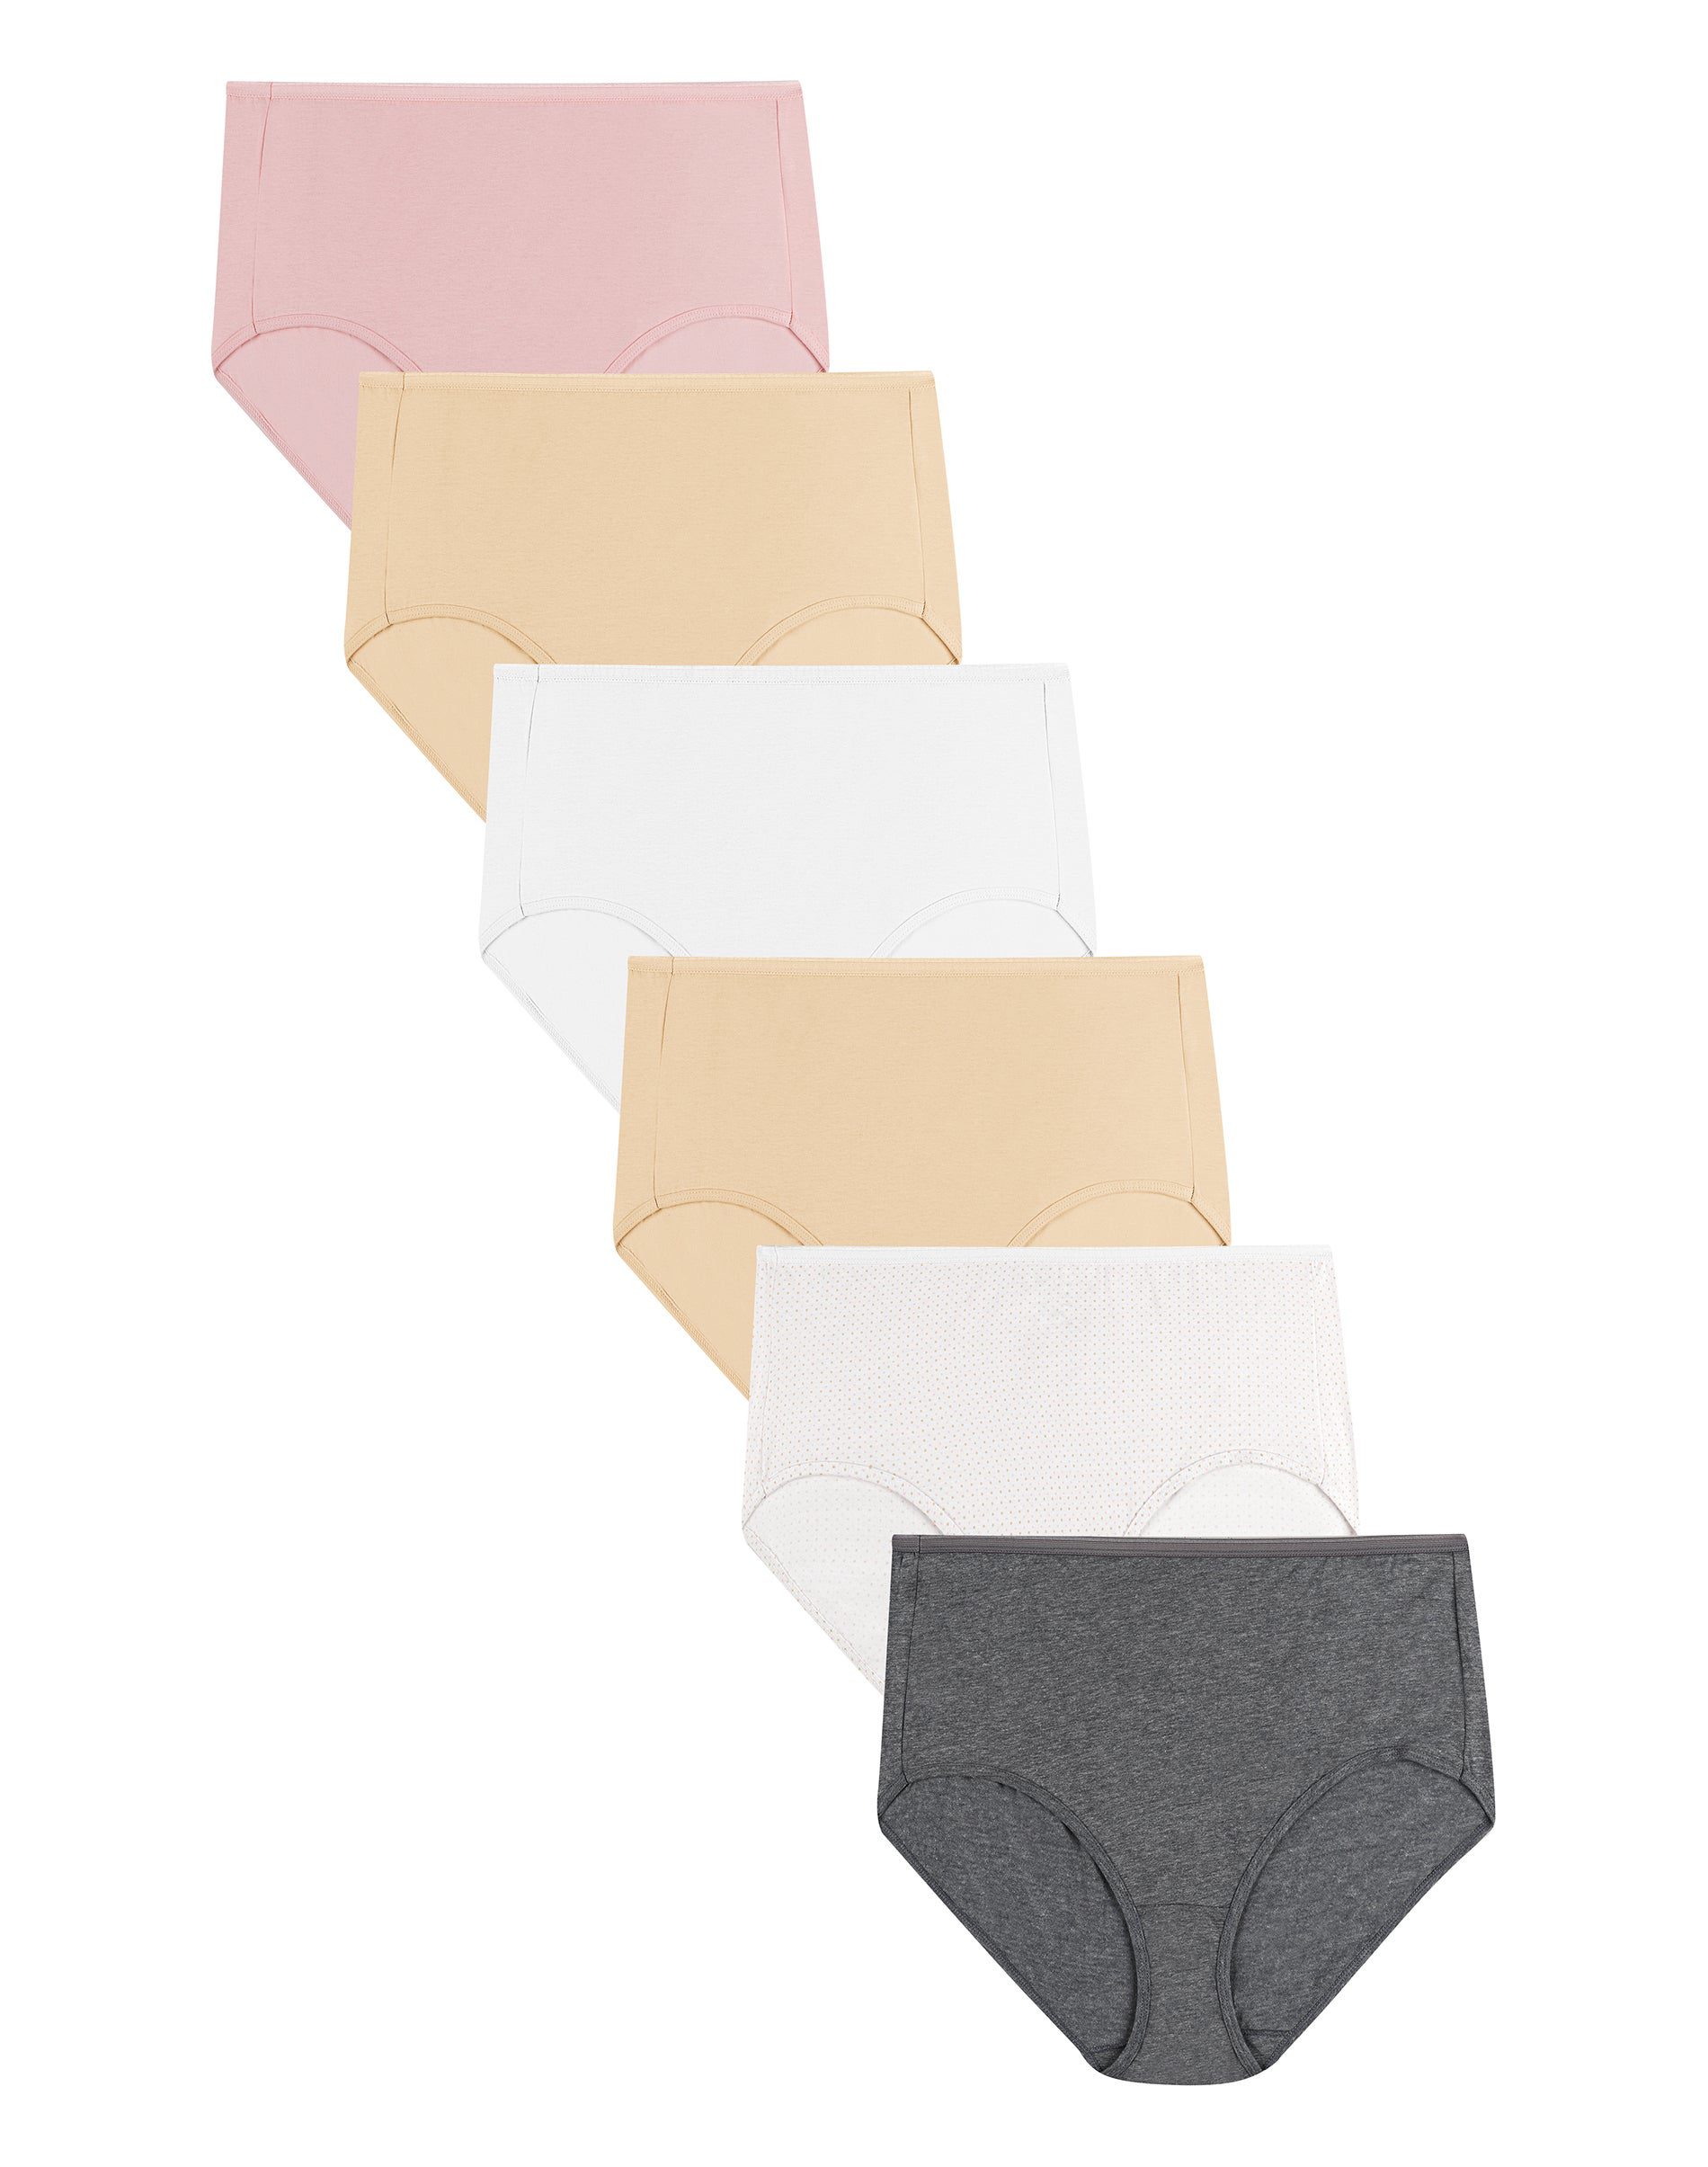 JMS by Hanes Womens Cotton High Briefs Assorted, 6-Pack